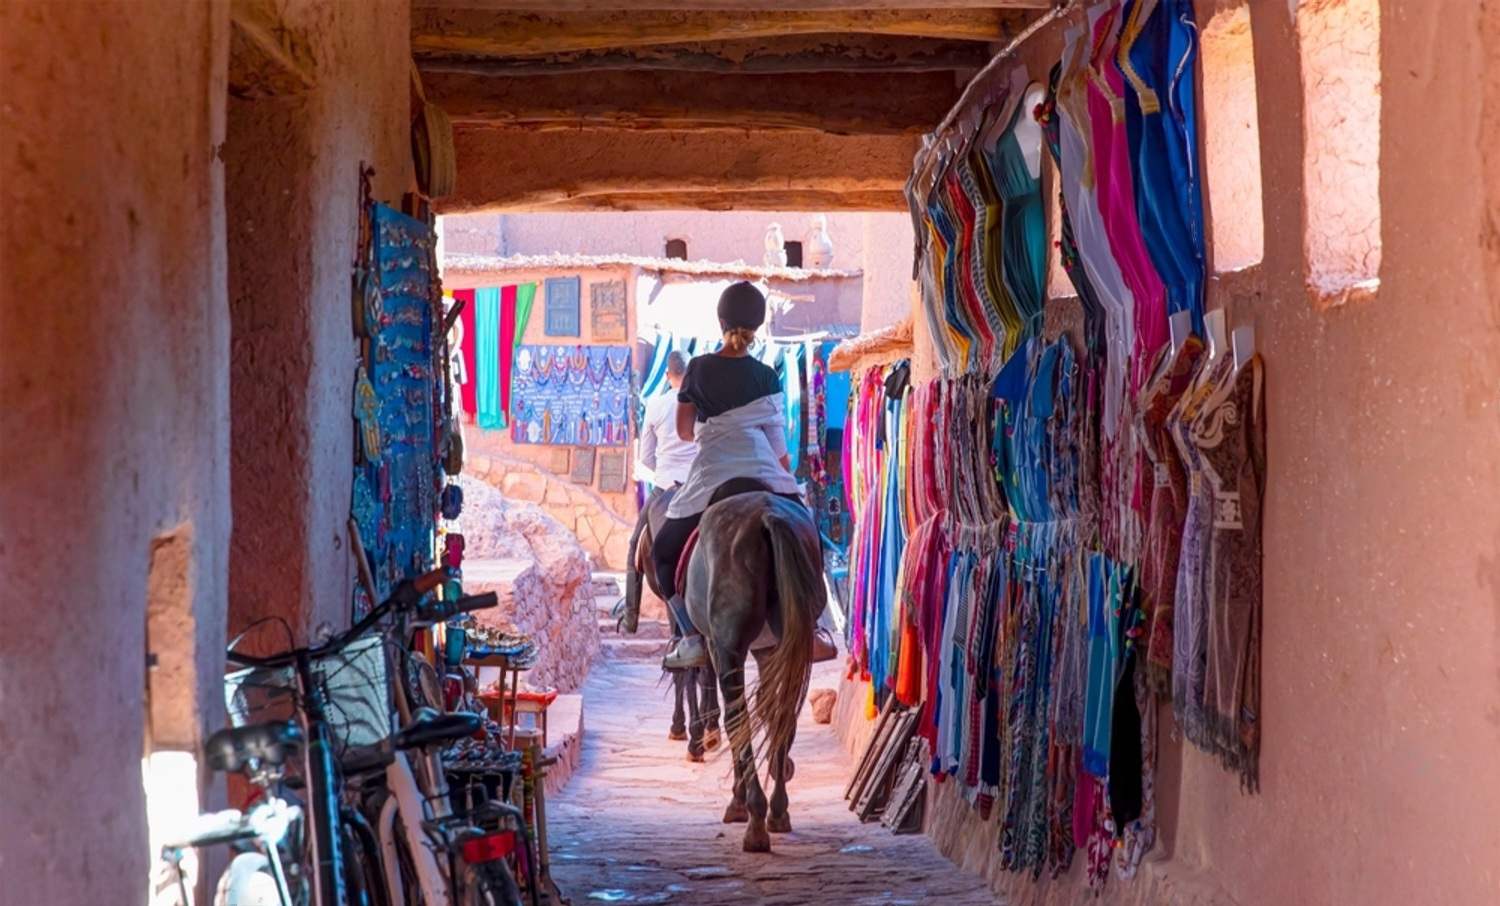 5 Days Tour from Marrakech to Fez